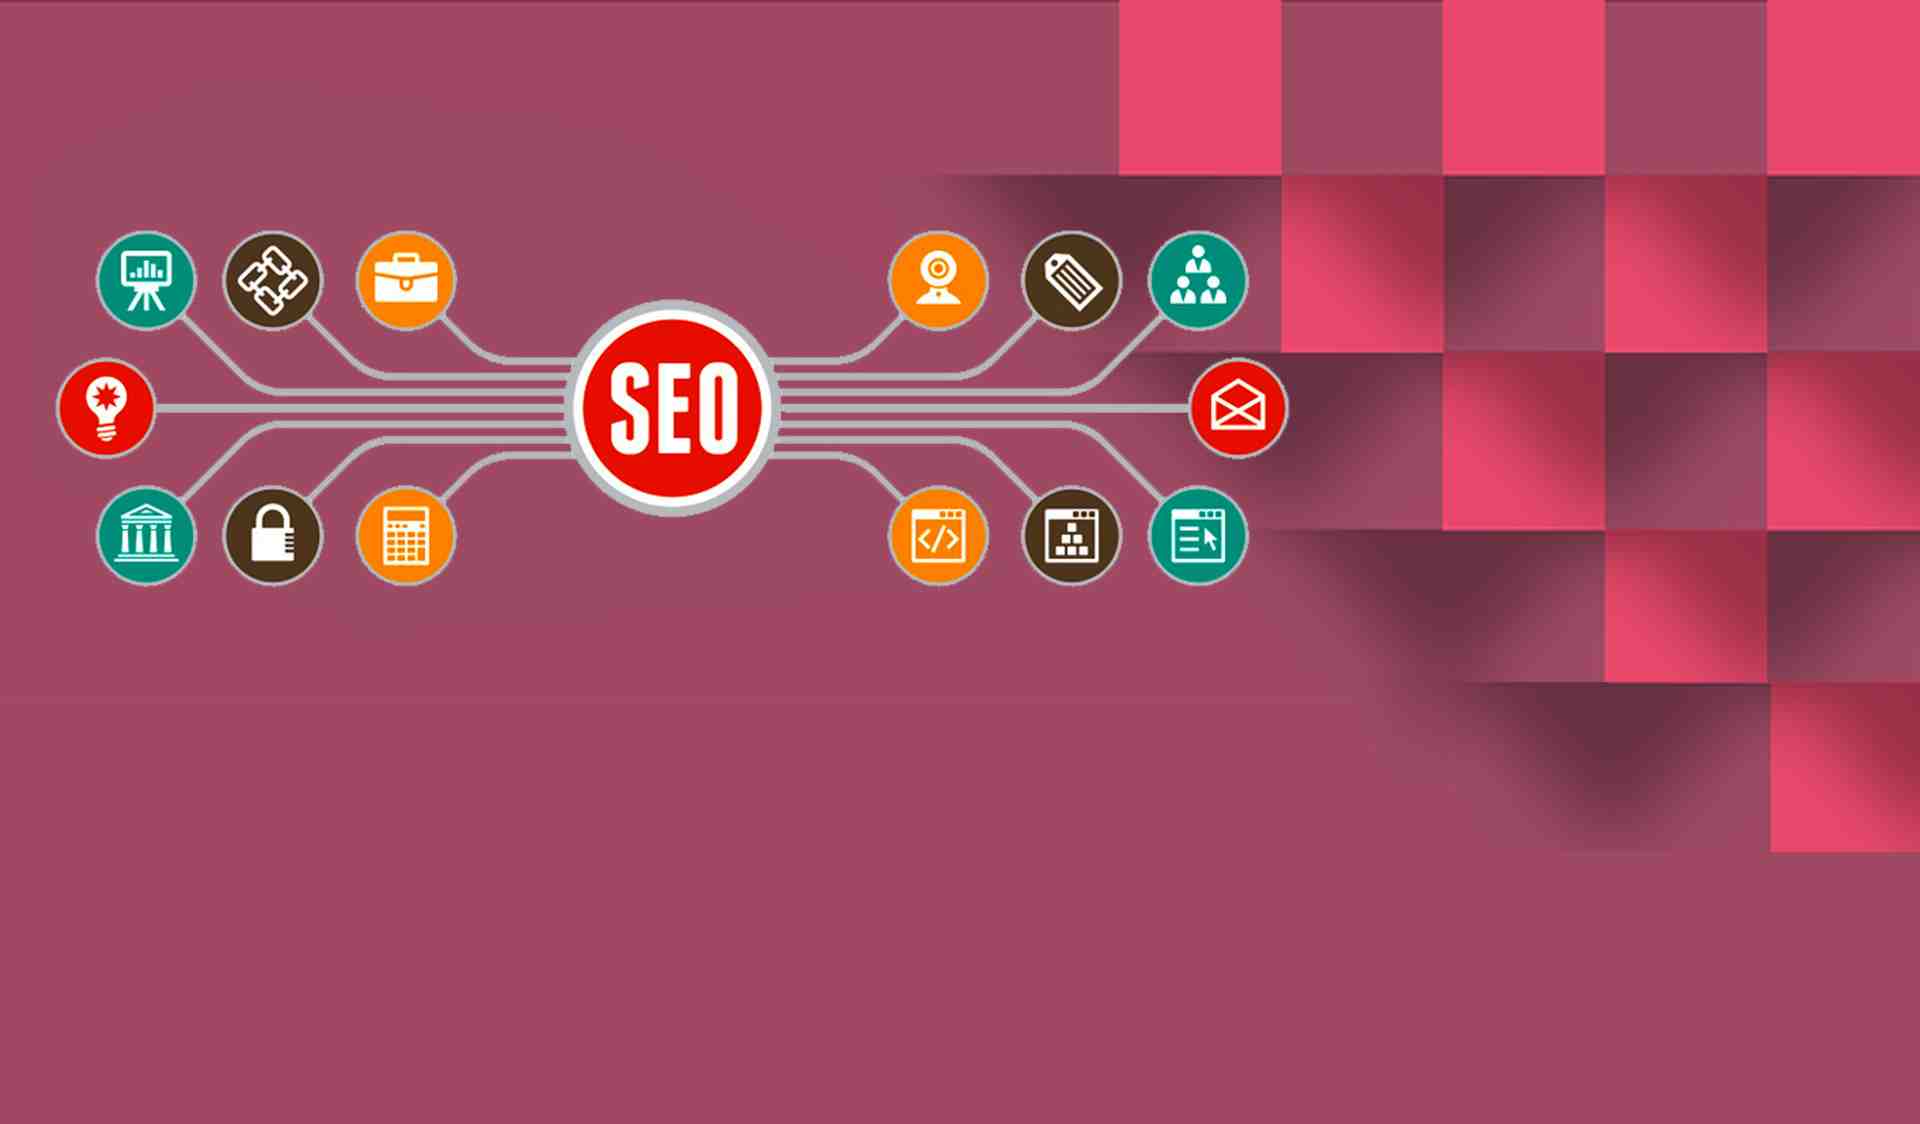 Maximize your business with the top SEO companies in Chandigarh. If you want your website to appear top on the results page of a Google search, hire a reputable SEO company in Chandigarh.